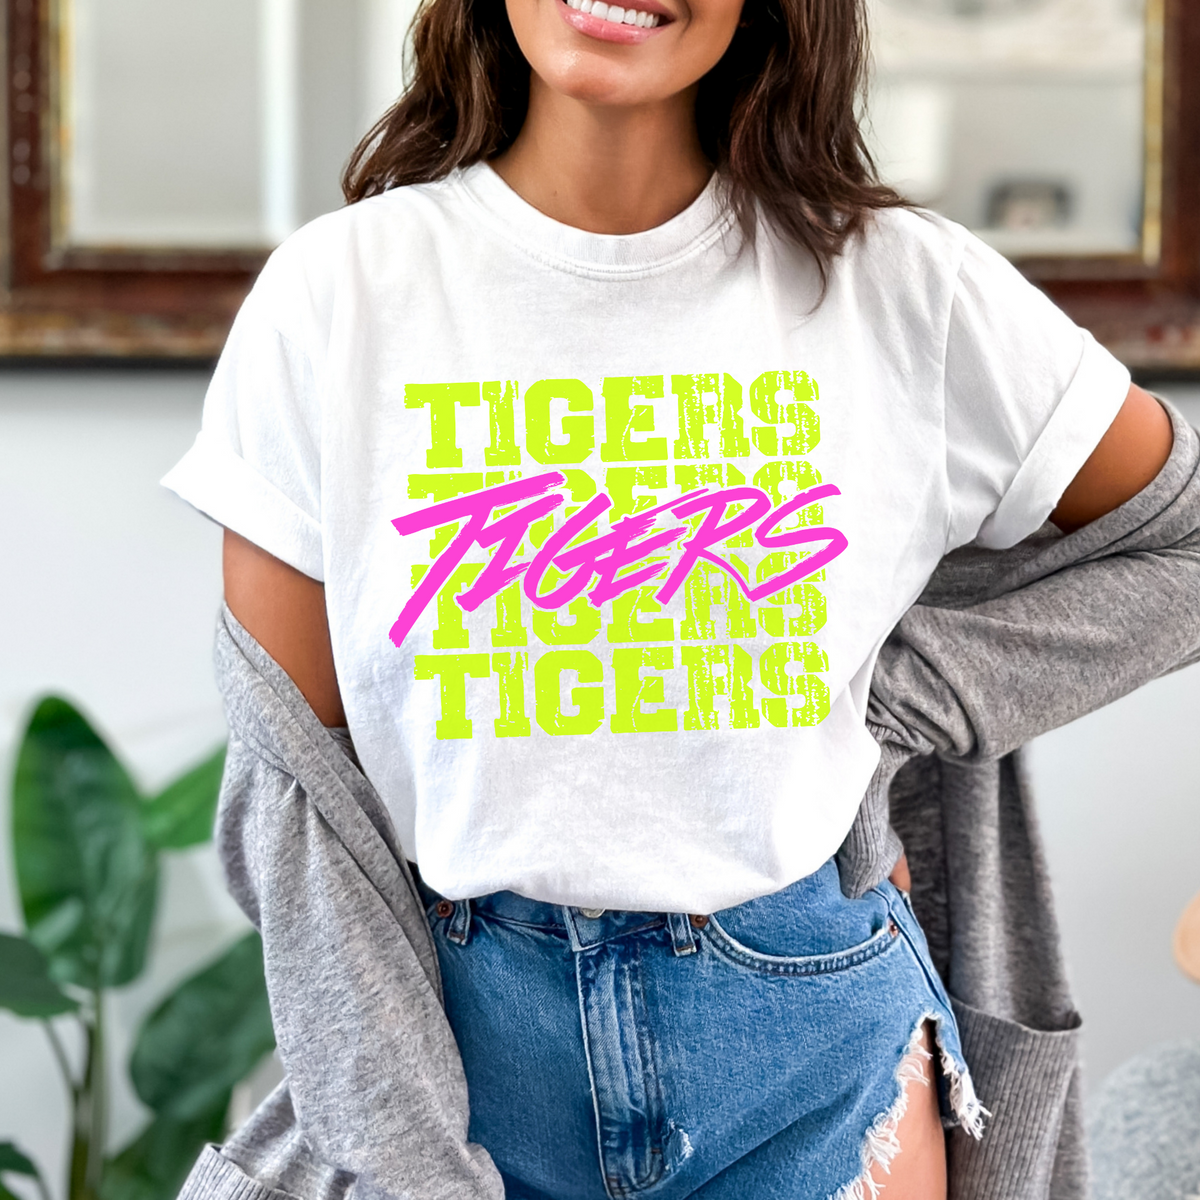 Tigers Stacked Cutout Bright Yellow & Pink Digital Design, PNG